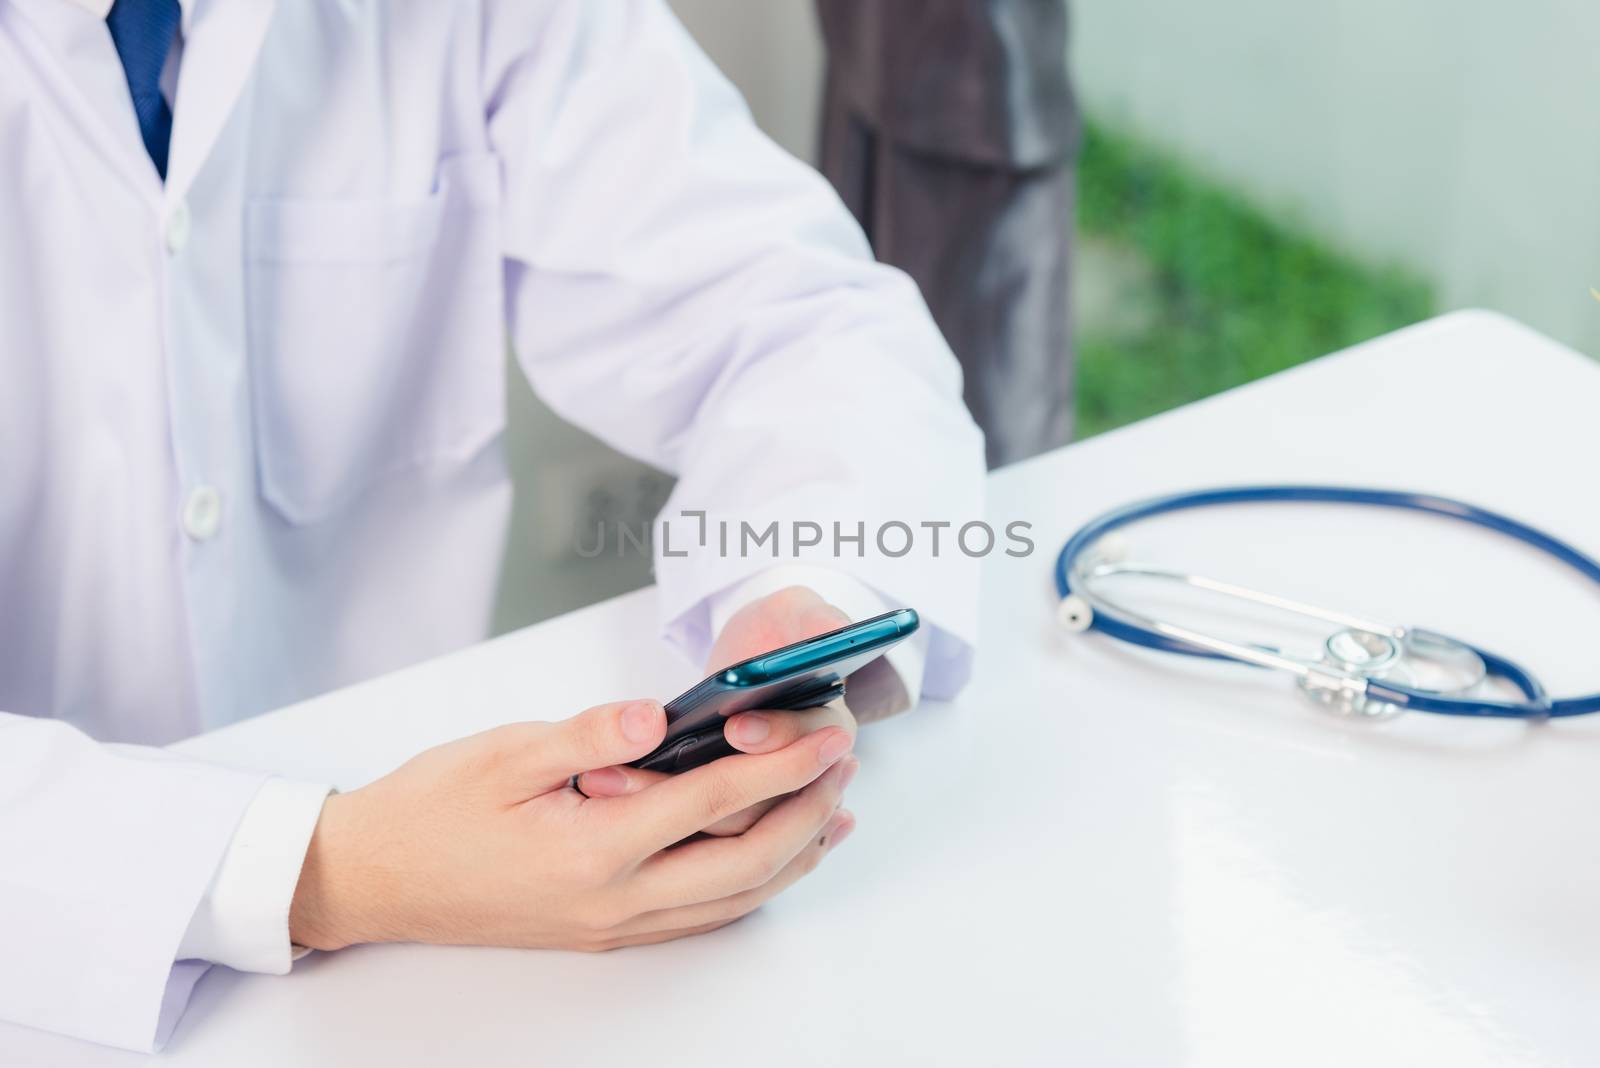 Doctor woman smiling using working with smart mobile phone by Sorapop